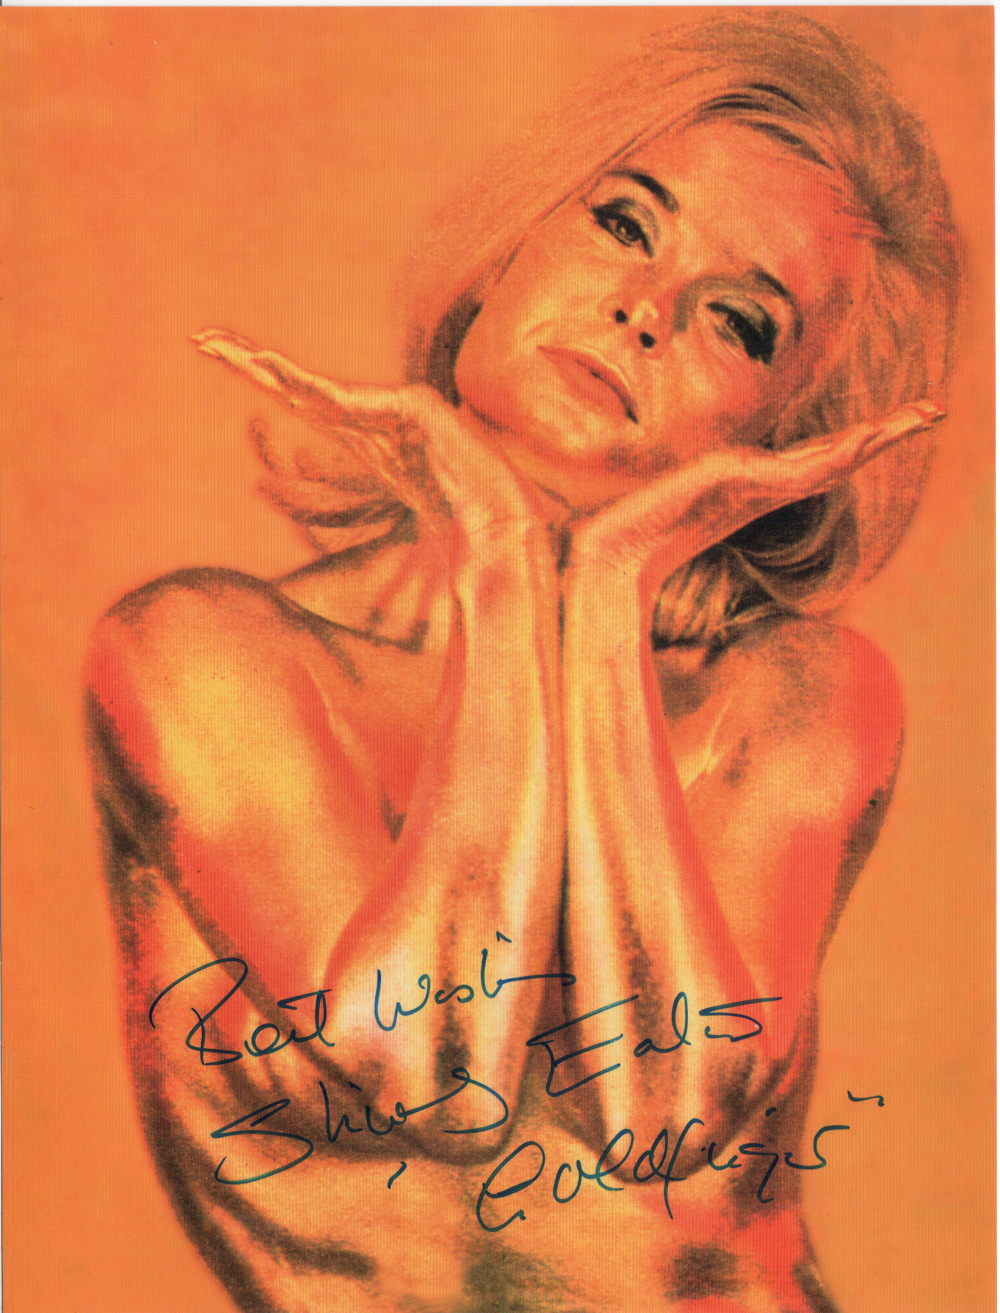 Best Wishes Shirley Eaton (played Jill Masterson in Goldfinger 1964)  to James Bond 007 Museum in Nybro Sweden and Gunnar James Bond Schäfer many thanks...